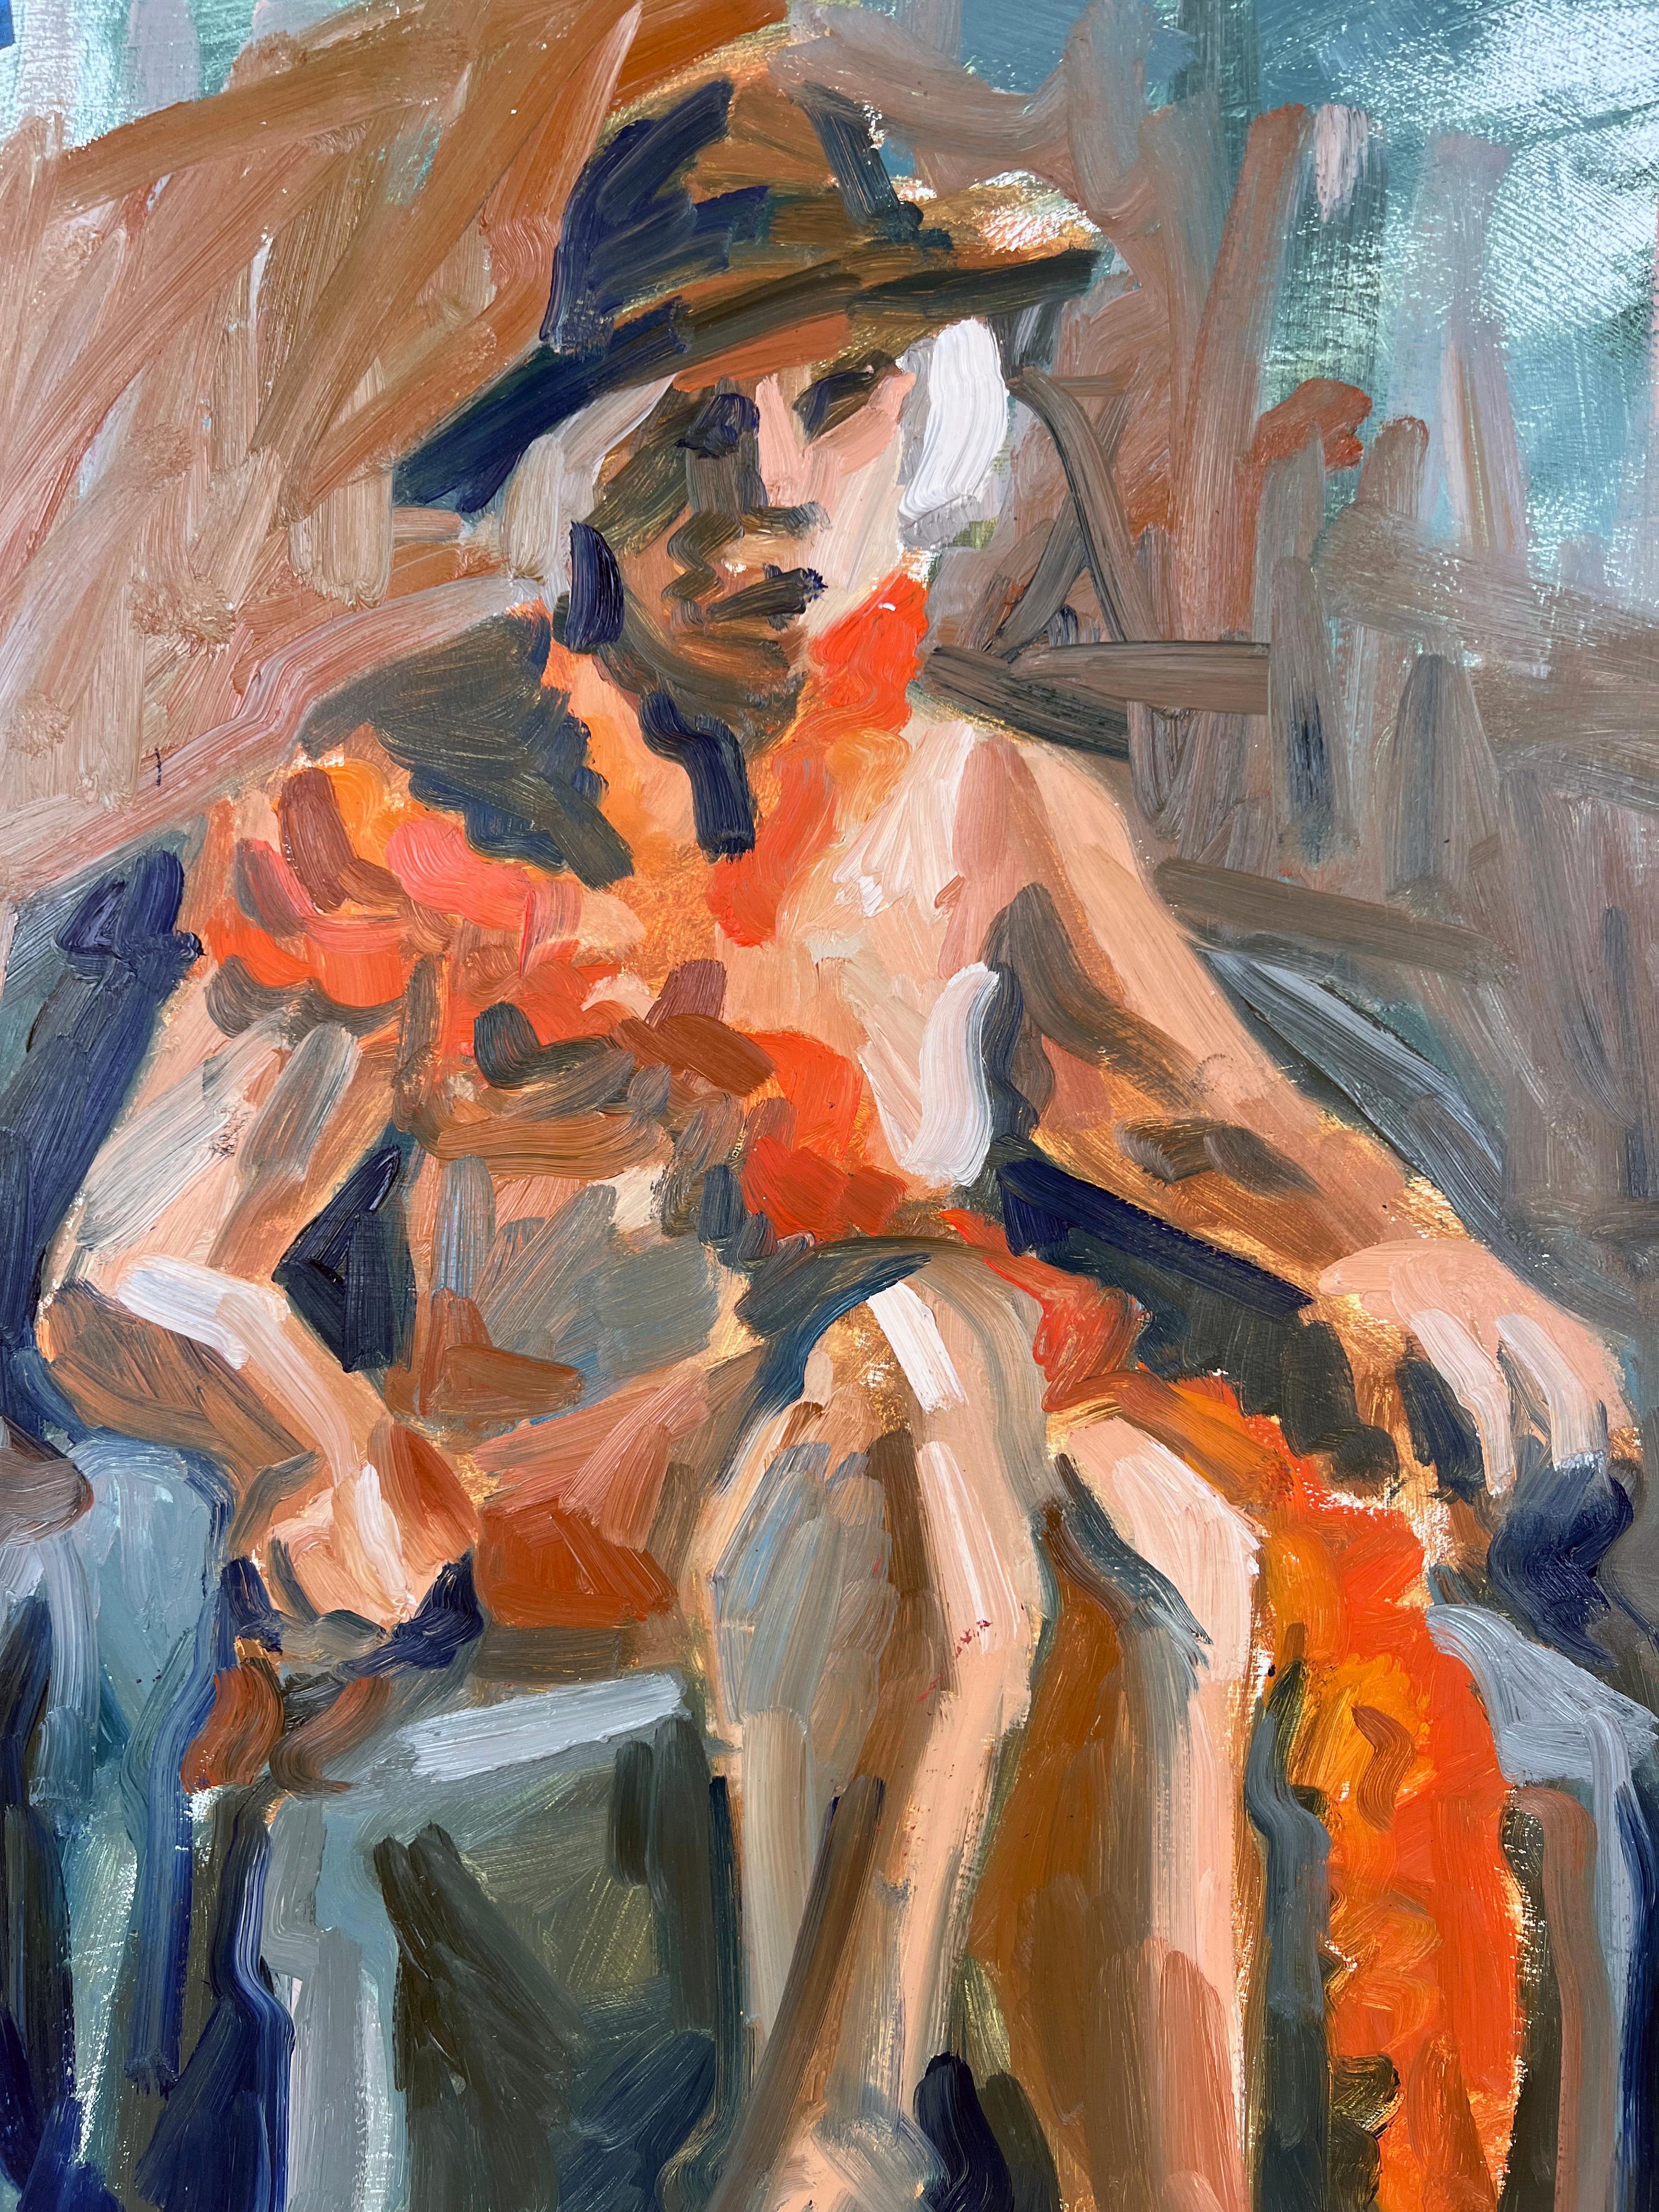 Femme nue assise Bay Area Figurative School Abstract Expressionist - Painting de Heather Speck